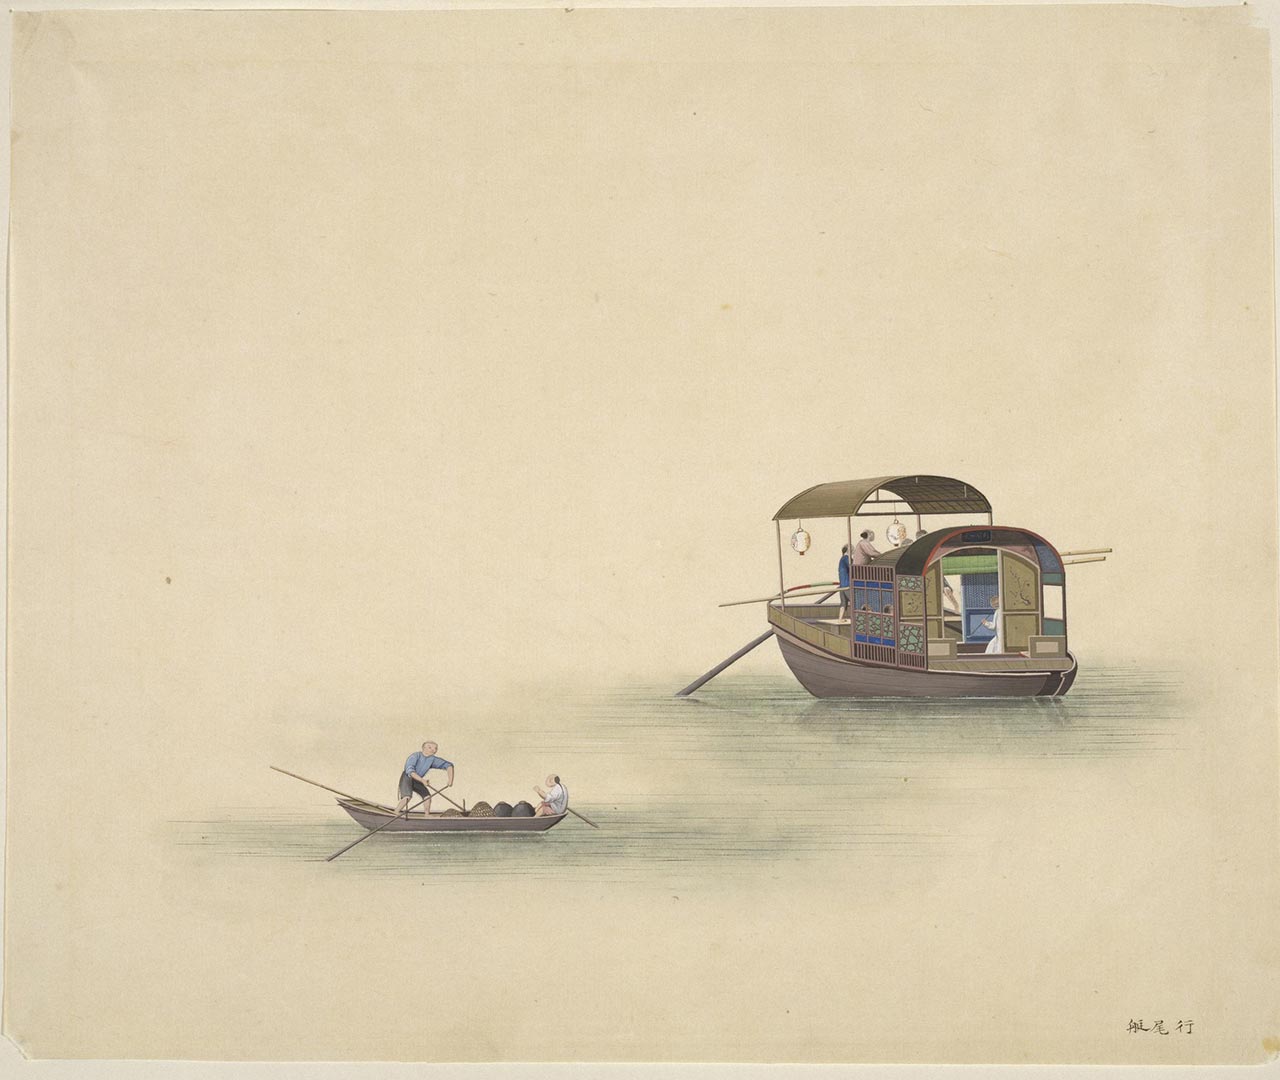 A tail boat, a small craft carrying merchandise that usually followed a larger boat. 